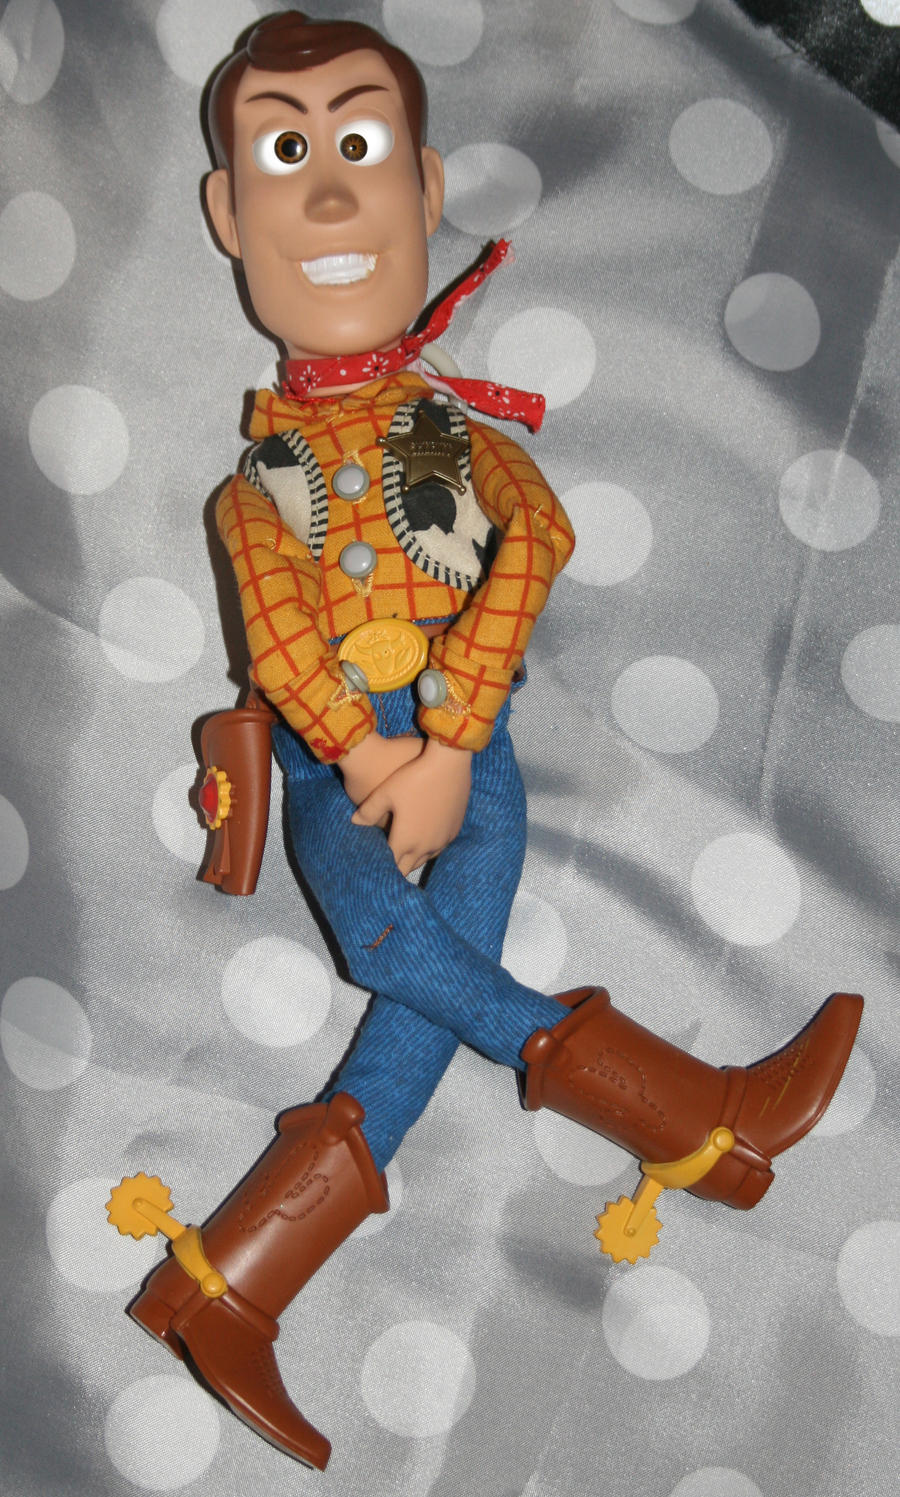 Woody Needs a Wee